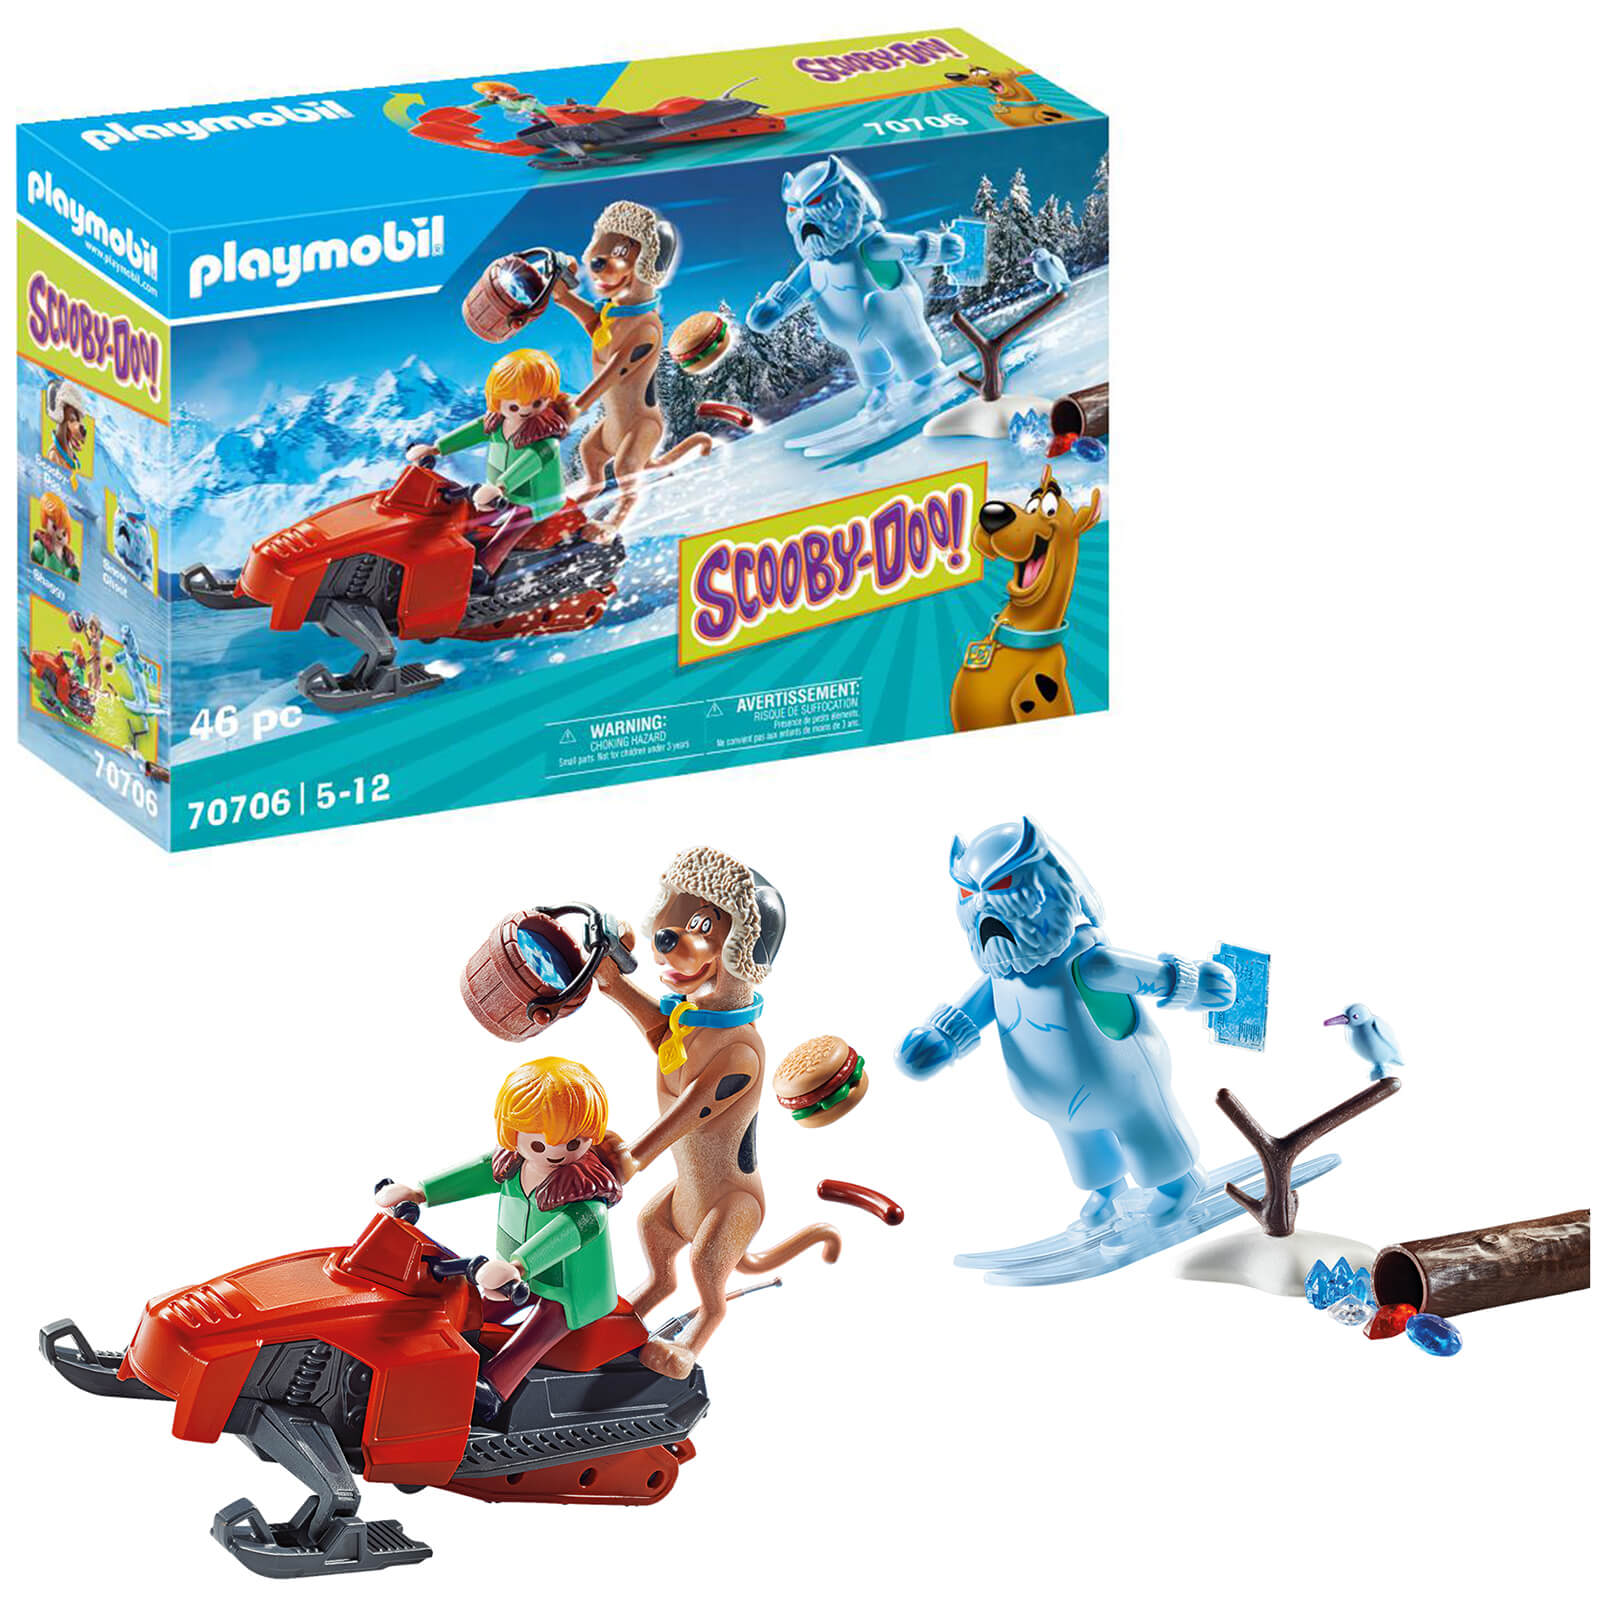 Playmobil SCOOBY DOO! Adventure With Snow Ghost (70706)